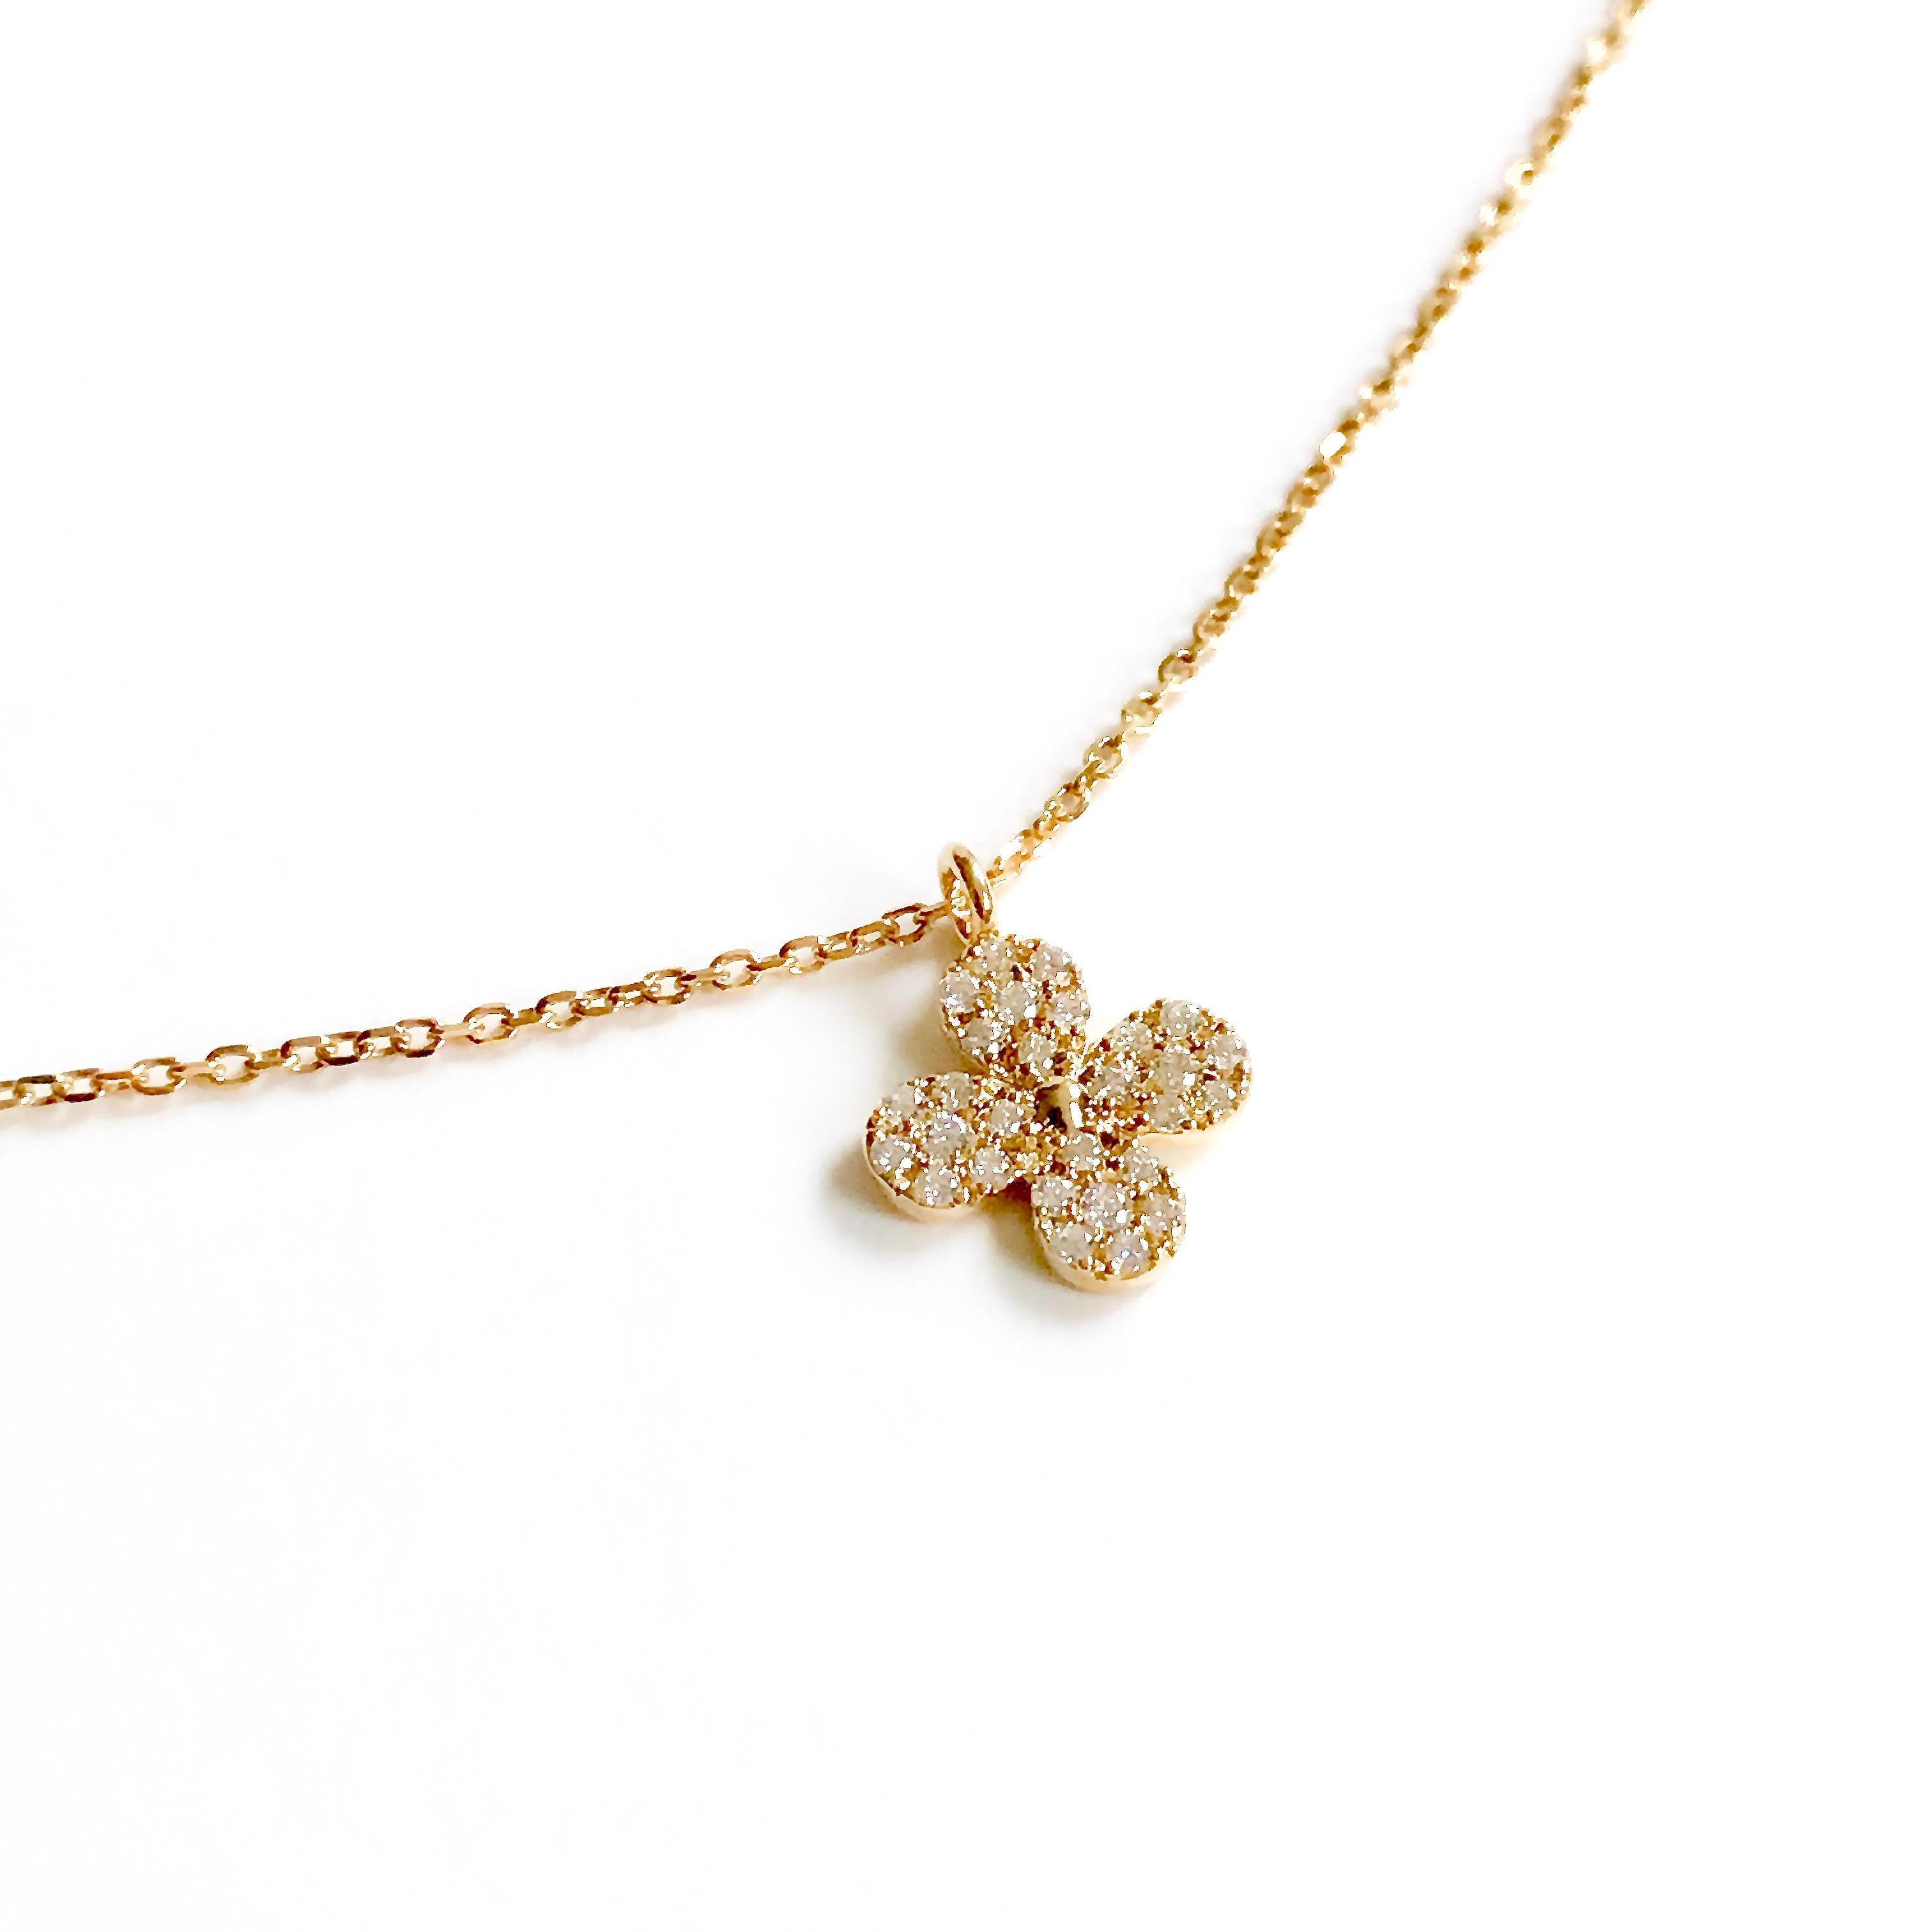 This flower pendant necklace is made of 18Karat yellow gold and is set with high-quality white diamonds.
Length: 40.00cm - 43.00cm
Pendant’s width: 1.00cm
Gemstone: White diamonds 0.16ct.
Hallmark: London Goldsmiths’ Company – Assay Office
You will